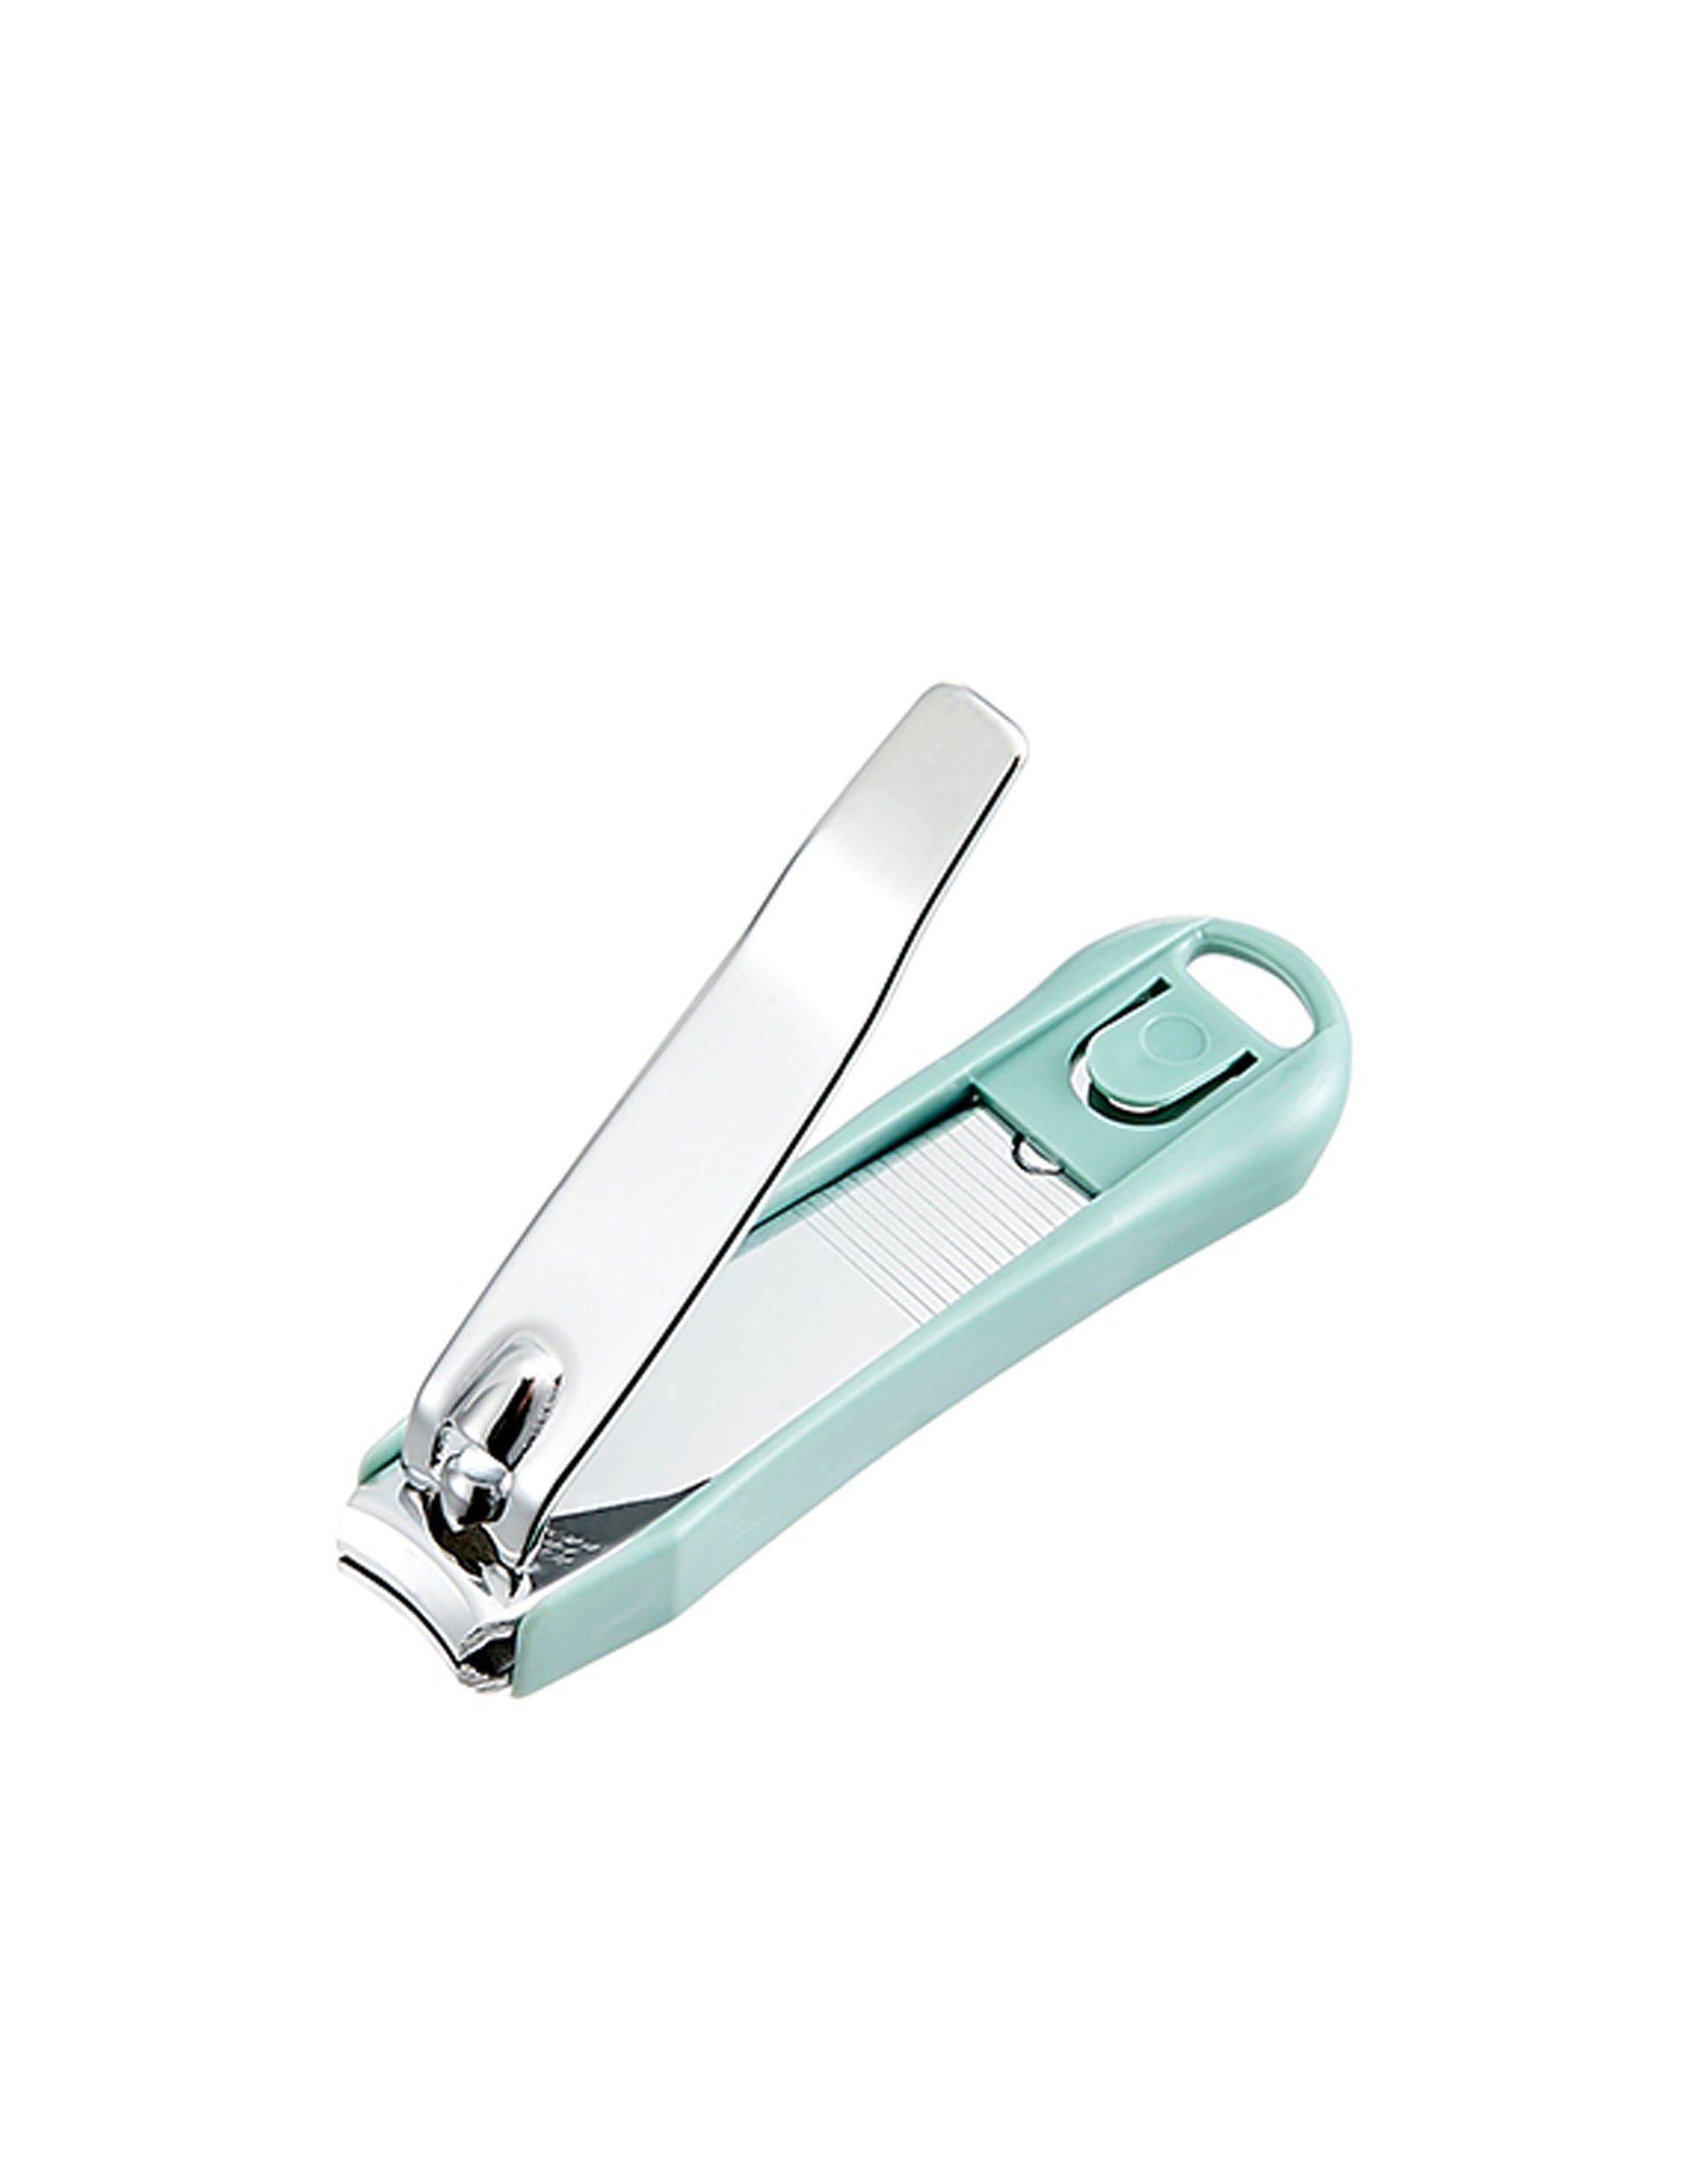 Pet Supplies Scissors Dog Nail Cutter Price Cats Nail Clipper Accessories  Animal Trimmers File Claw Cutters Cut The Nails From Amazing8888, $1.11 |  DHgate.Com